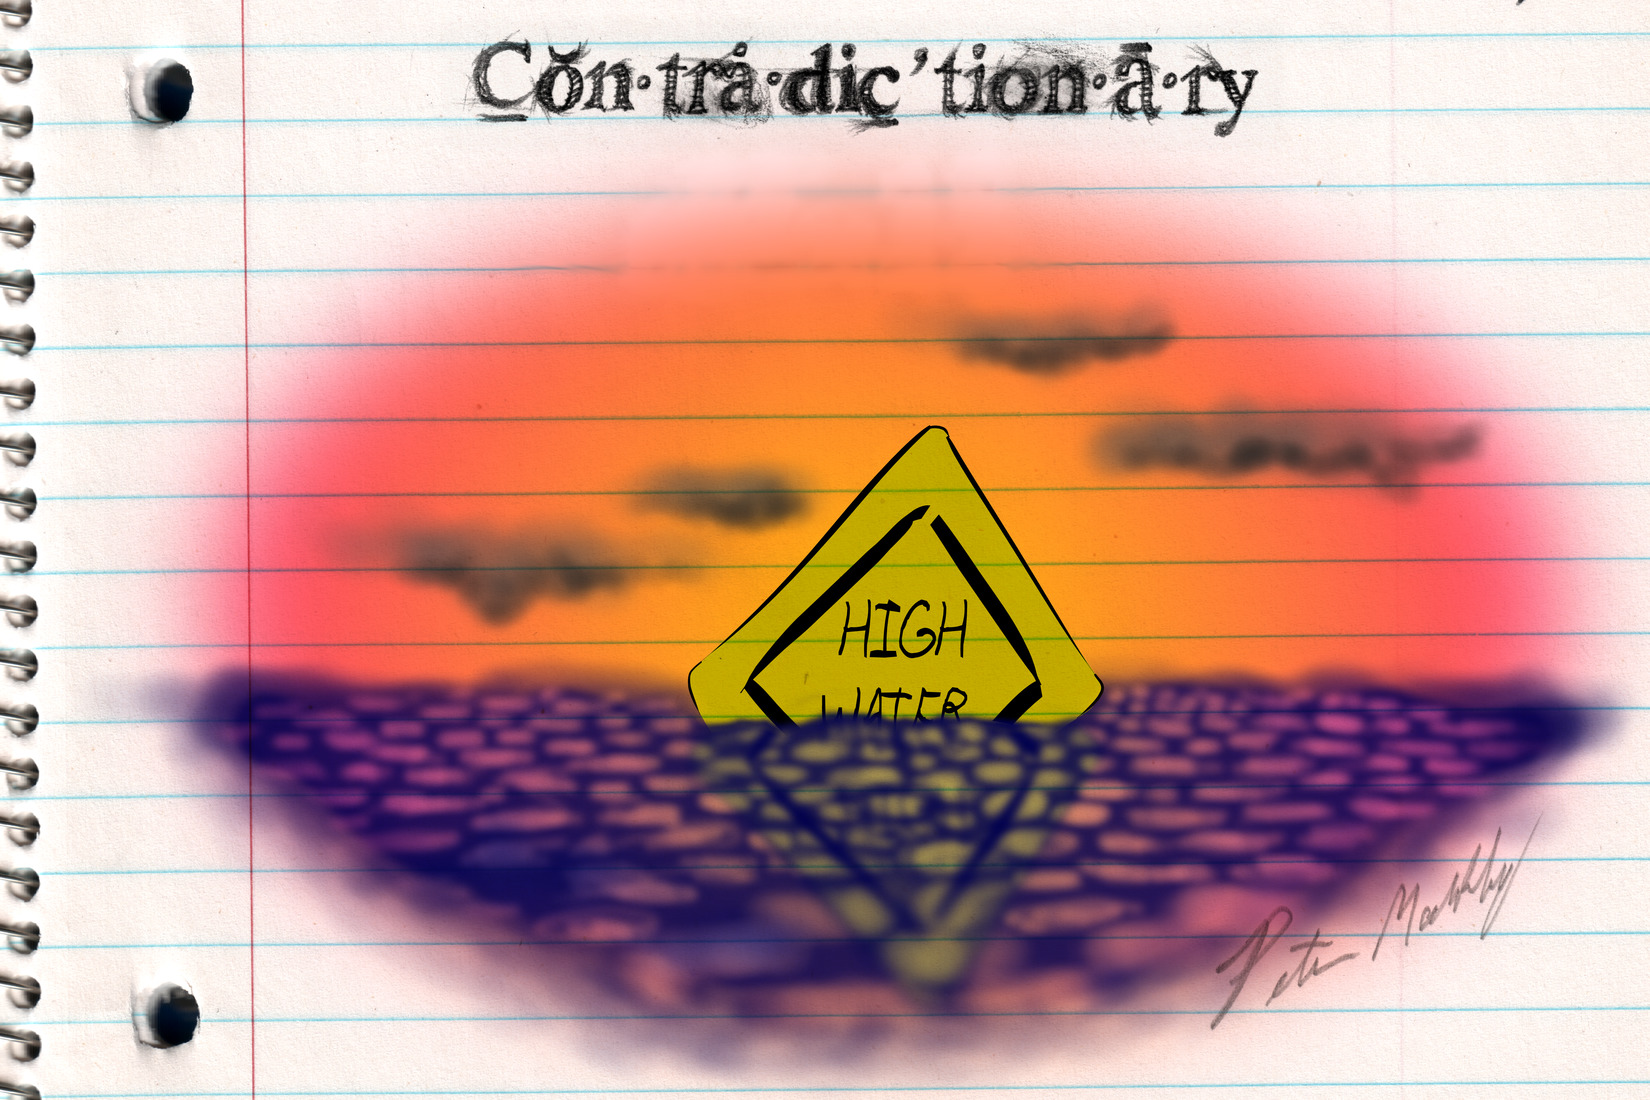 Contradictionary – High Water